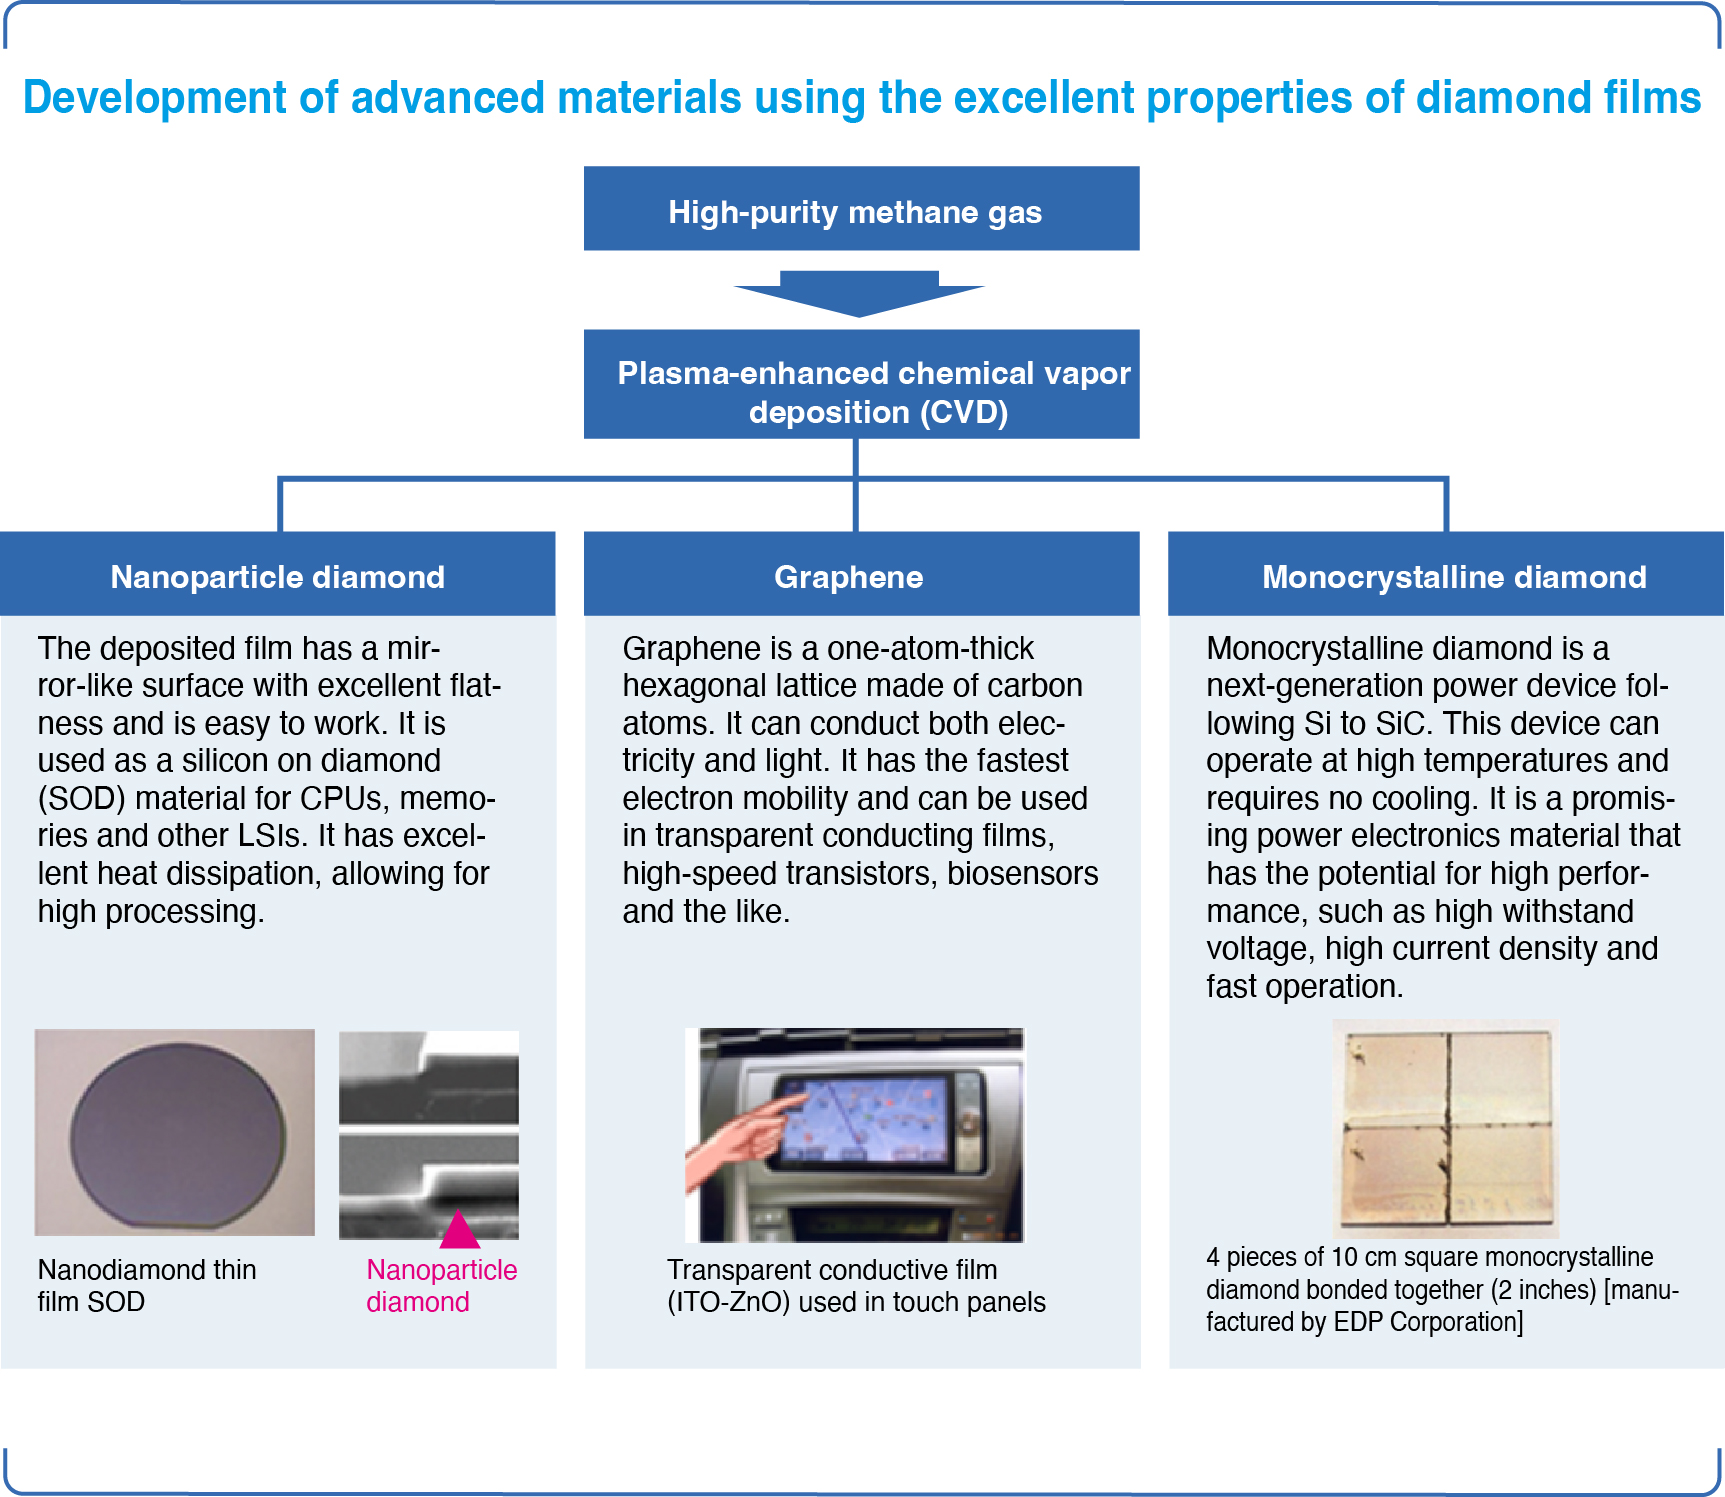 Development of advanced materials using the excellent properties of diamond films